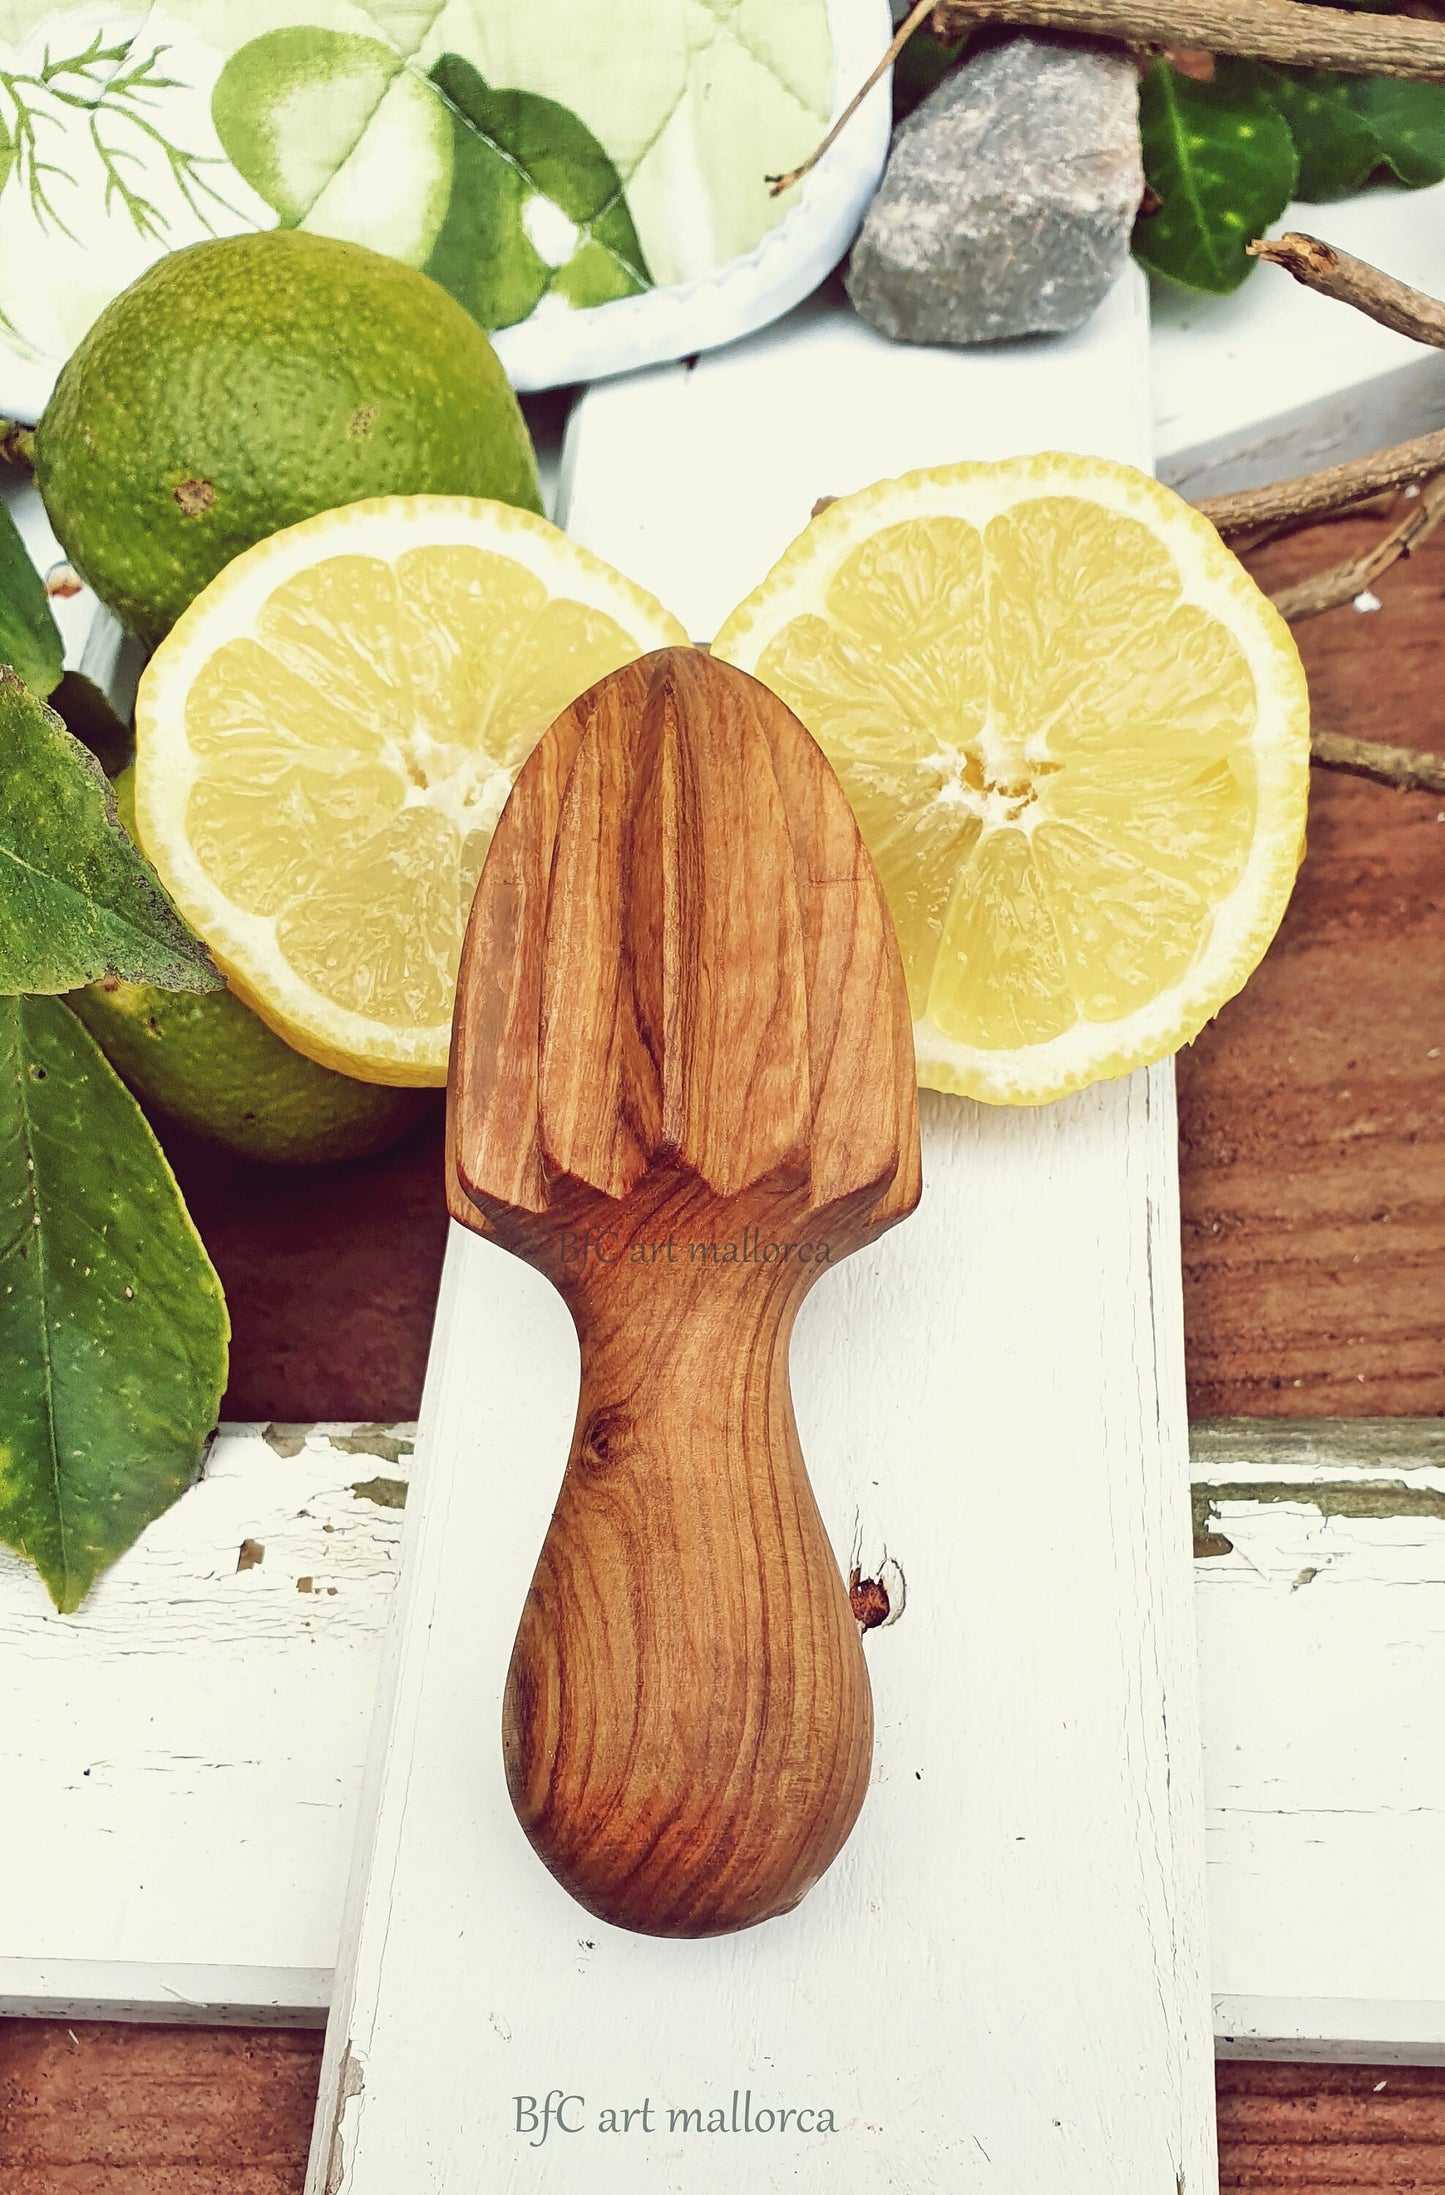 Hand Reamer Wooden Lime Squeezer Juice, Orange Citrus Fruit Extractor Reamer, Wooden juicer for fruits to extract Juice Quick and Easy Juice